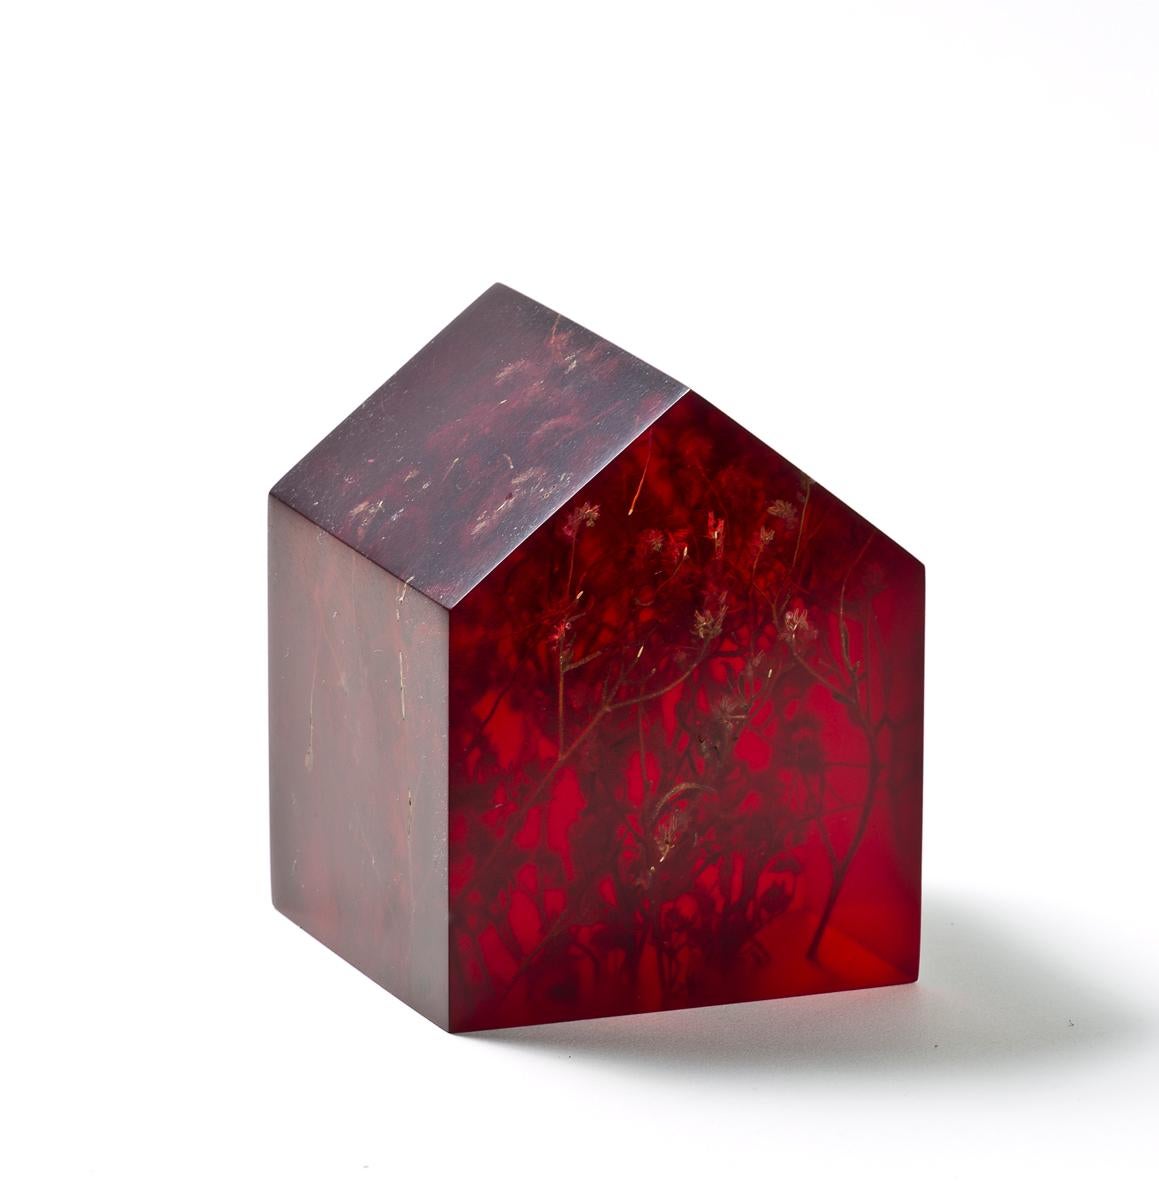 Abstract Sculpture Mayme Kratz - Dwelling with Bush